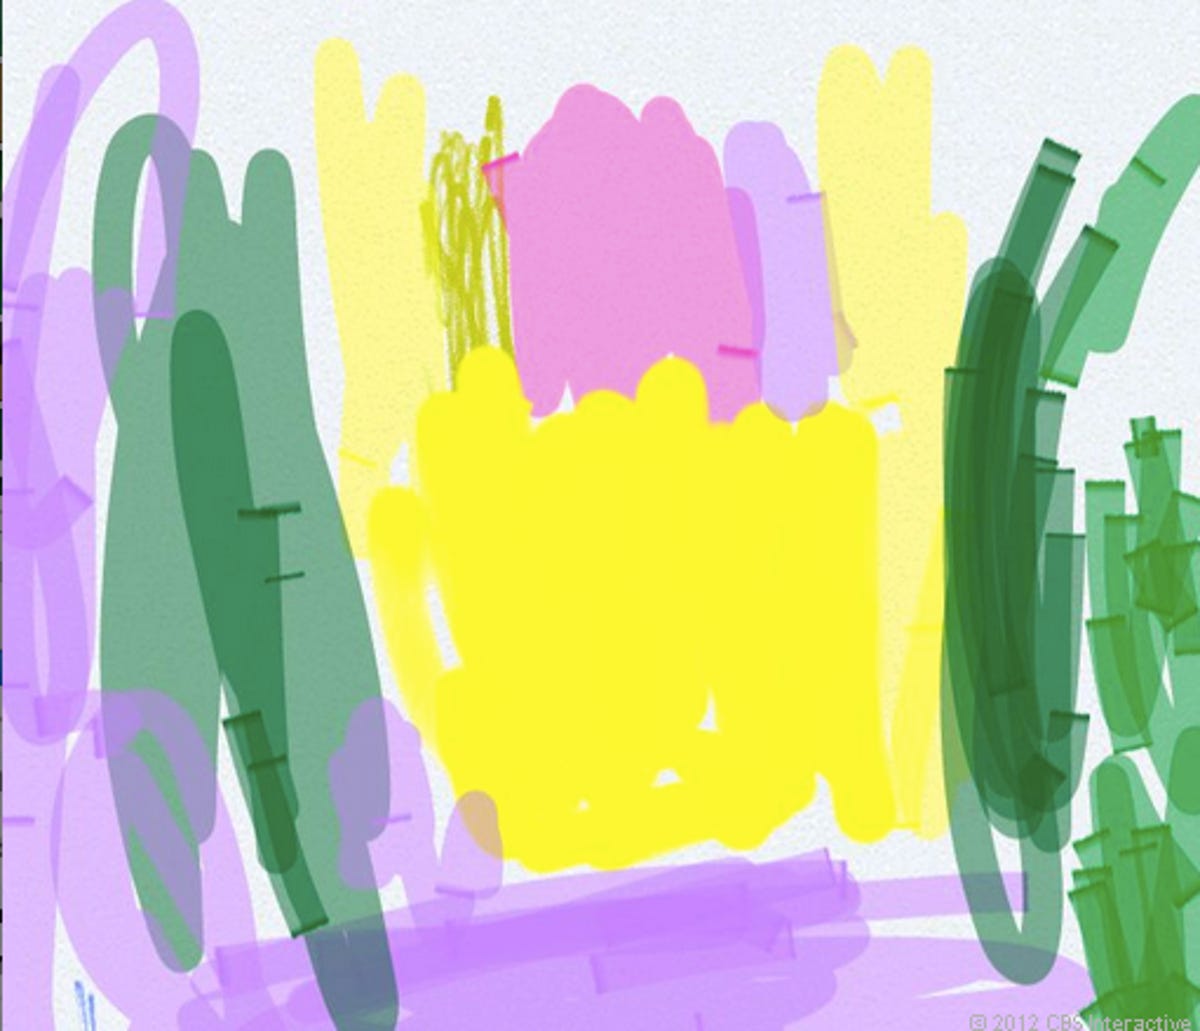 Child's art, drawn with the S Pen on the Samsung Galaxy Note 2